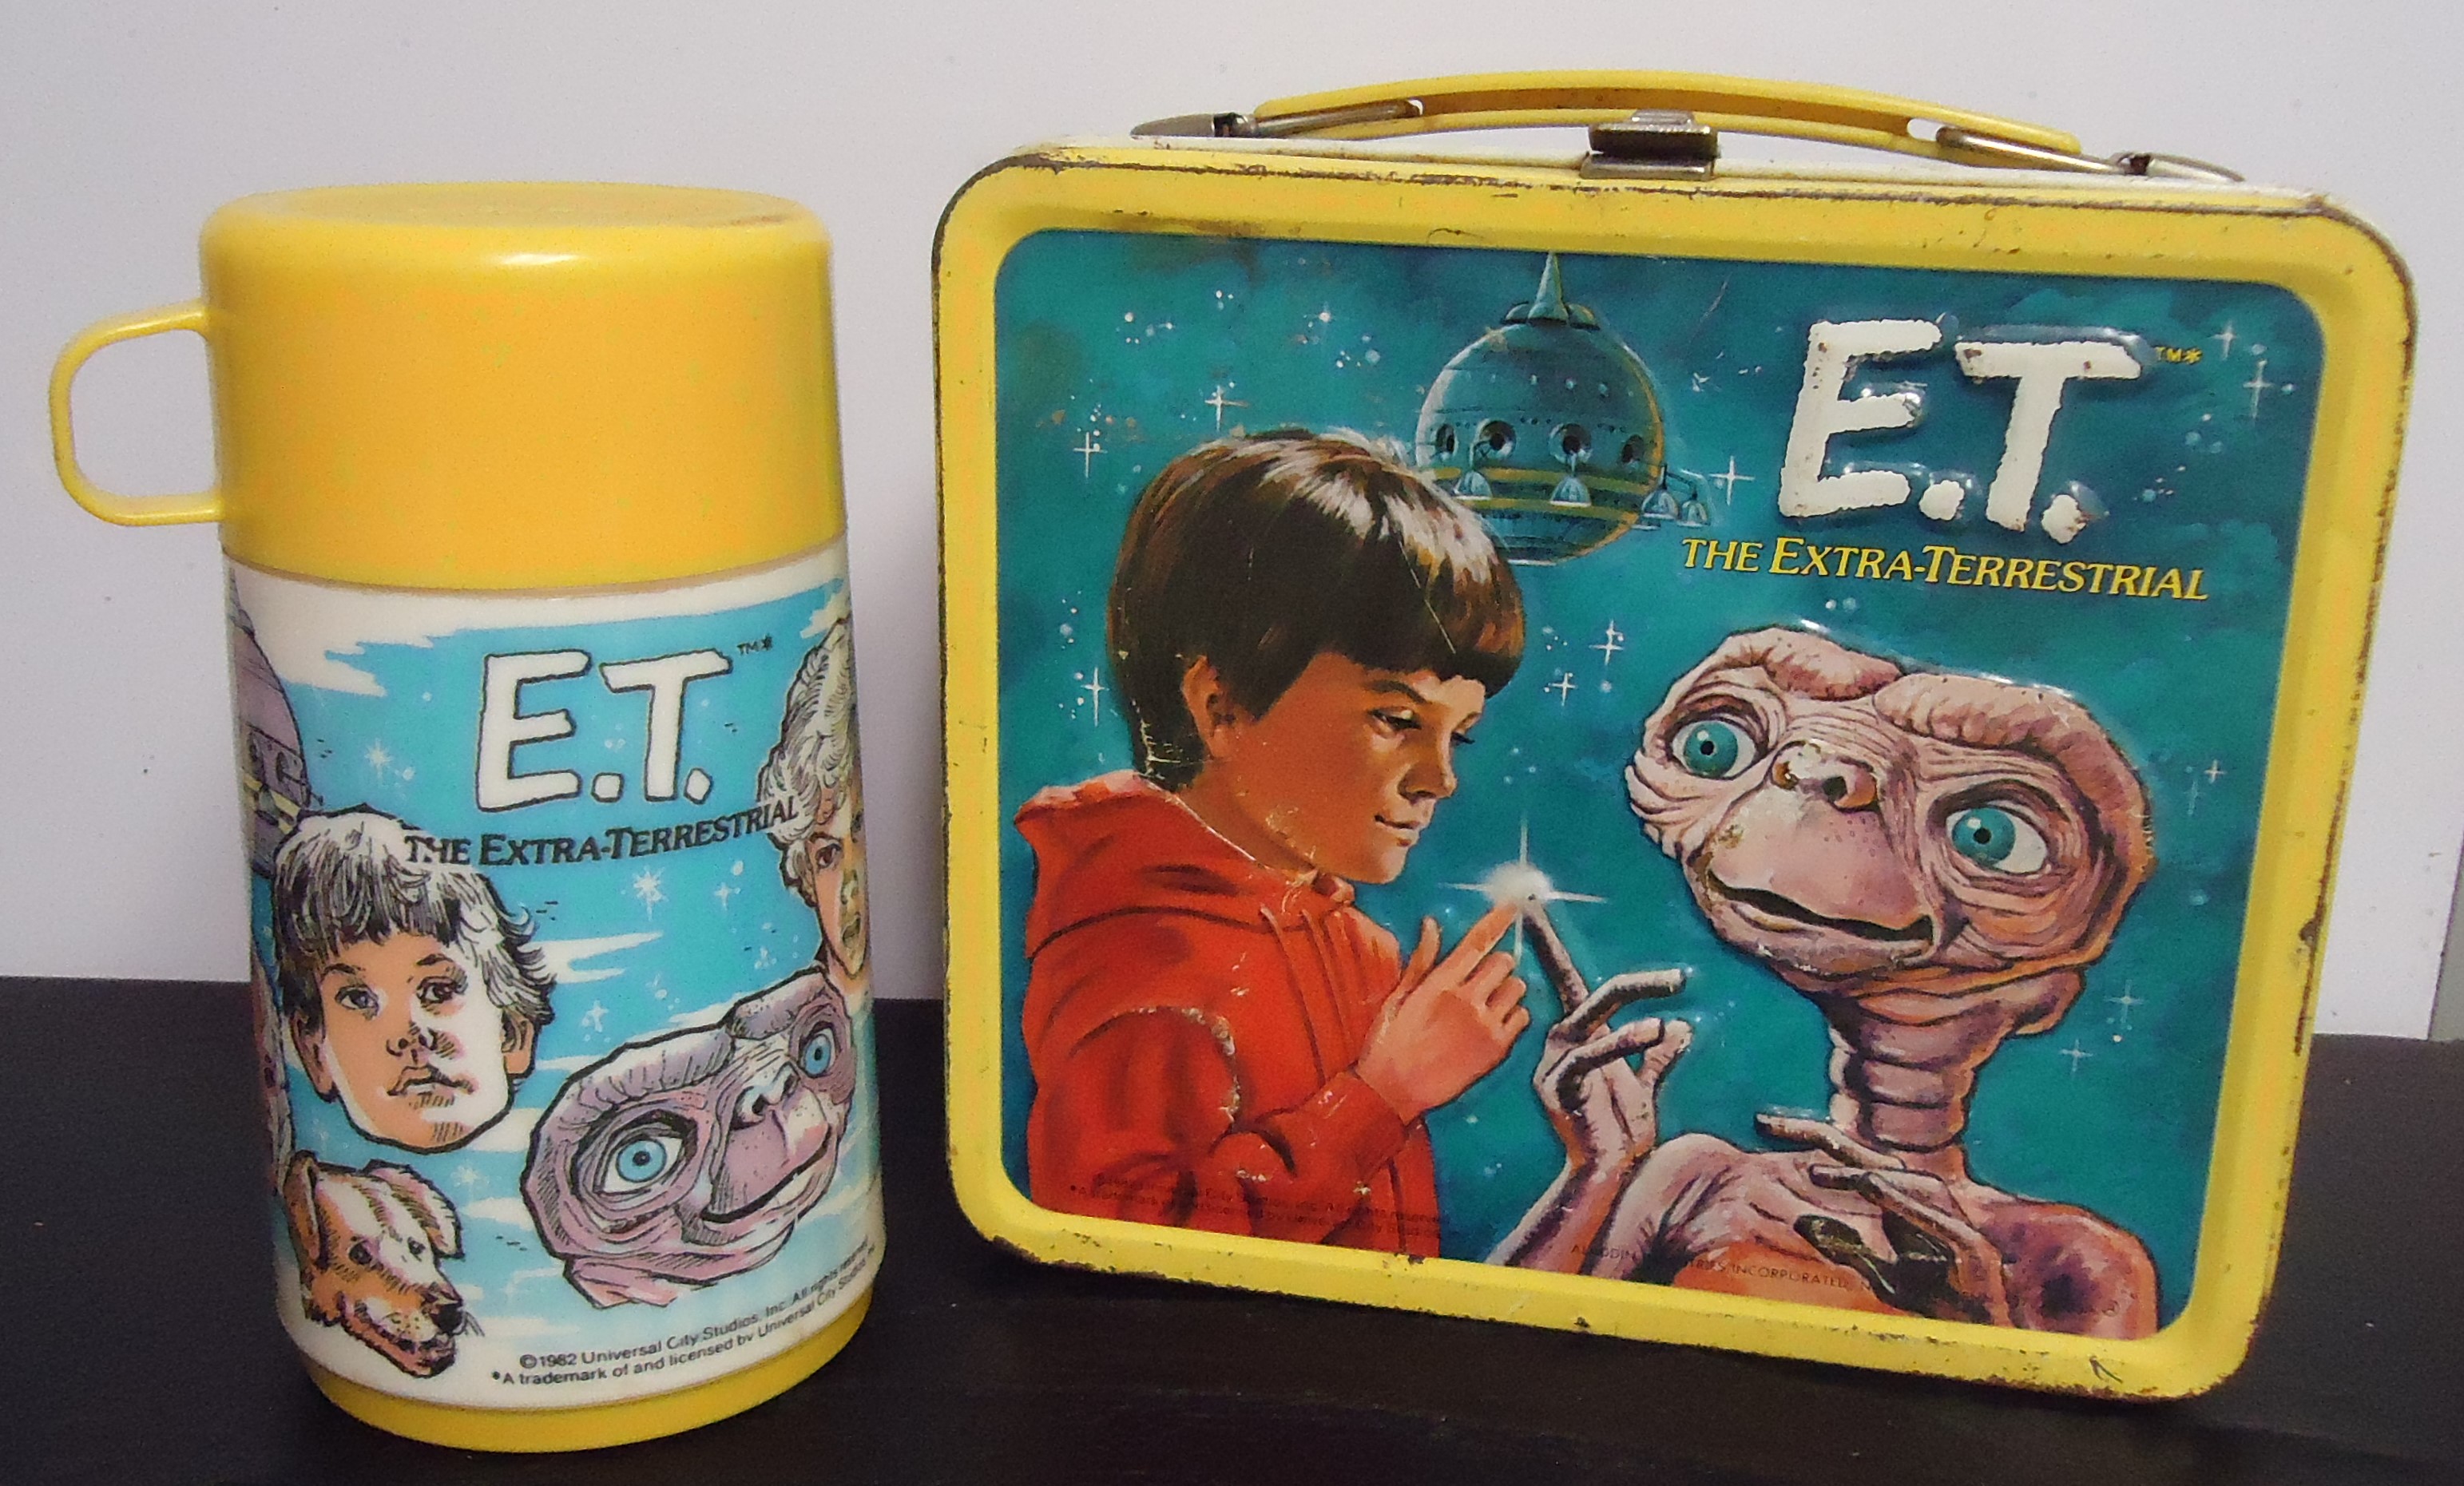 (6) "E.T." Metal Lunch Box
W/ Thermos
$50.00